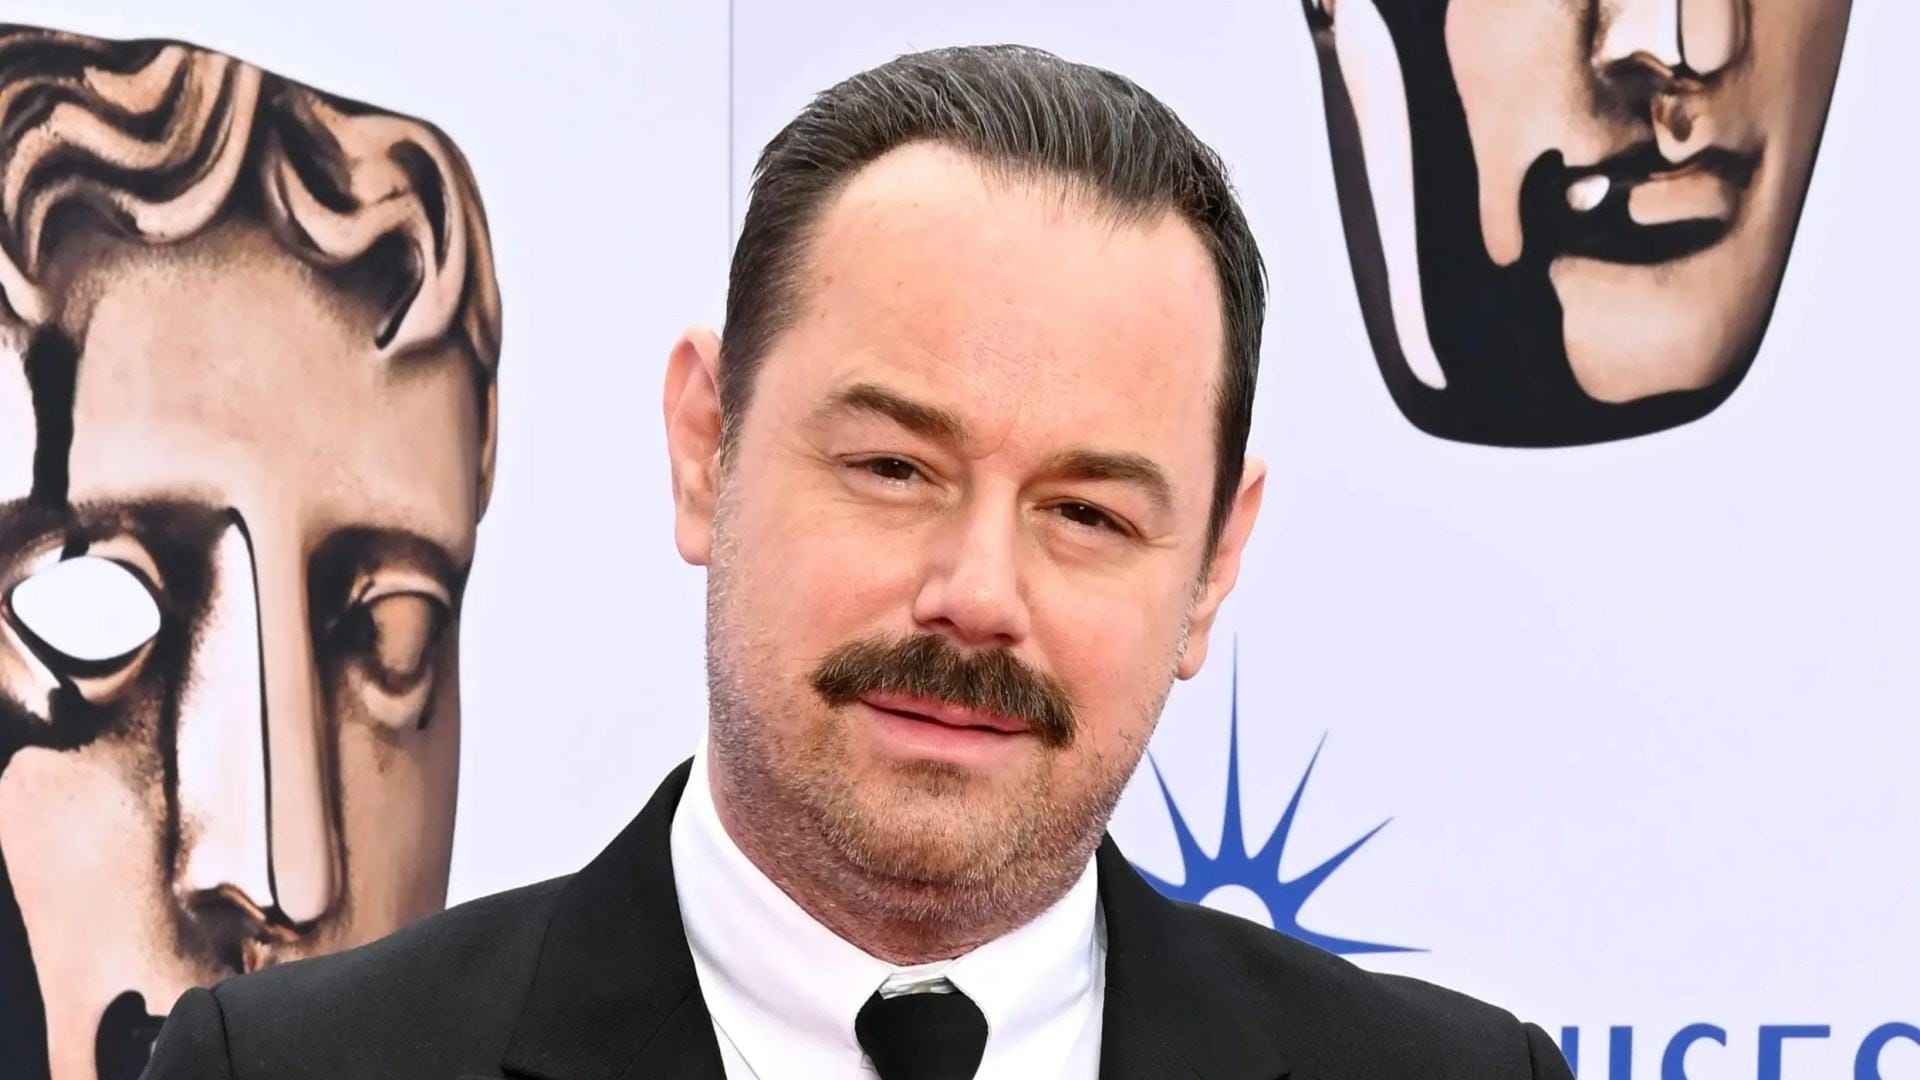 Danny Dyer in talks for sequel to epic film which made him famous